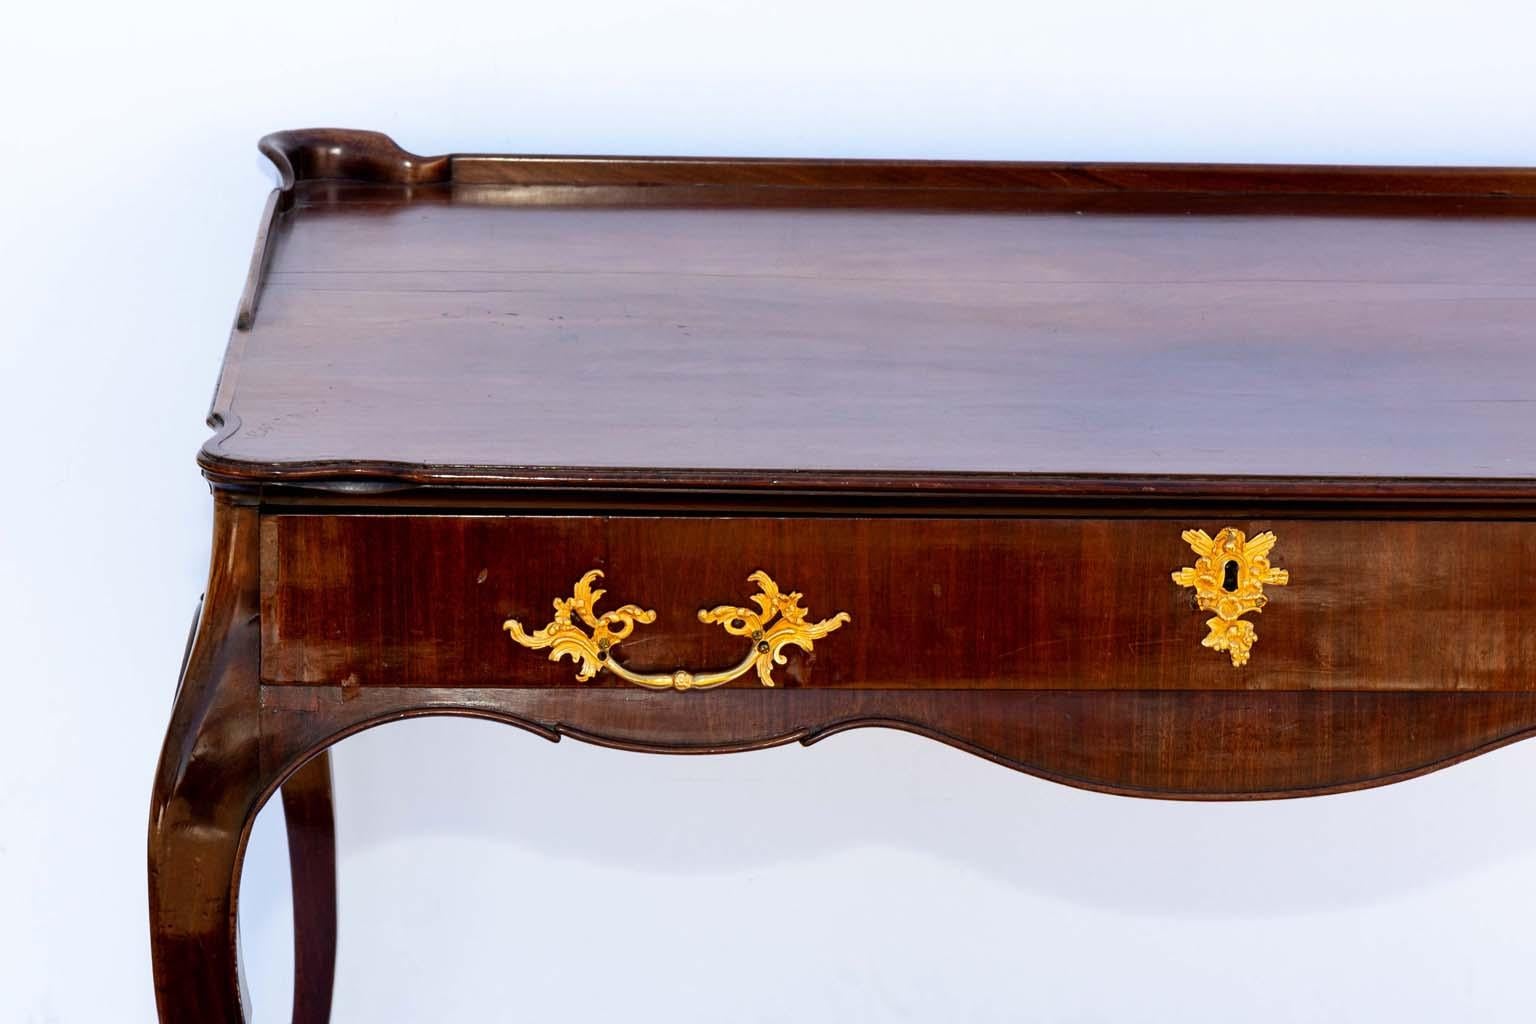 Late 18th century to early 19th century writing table.
